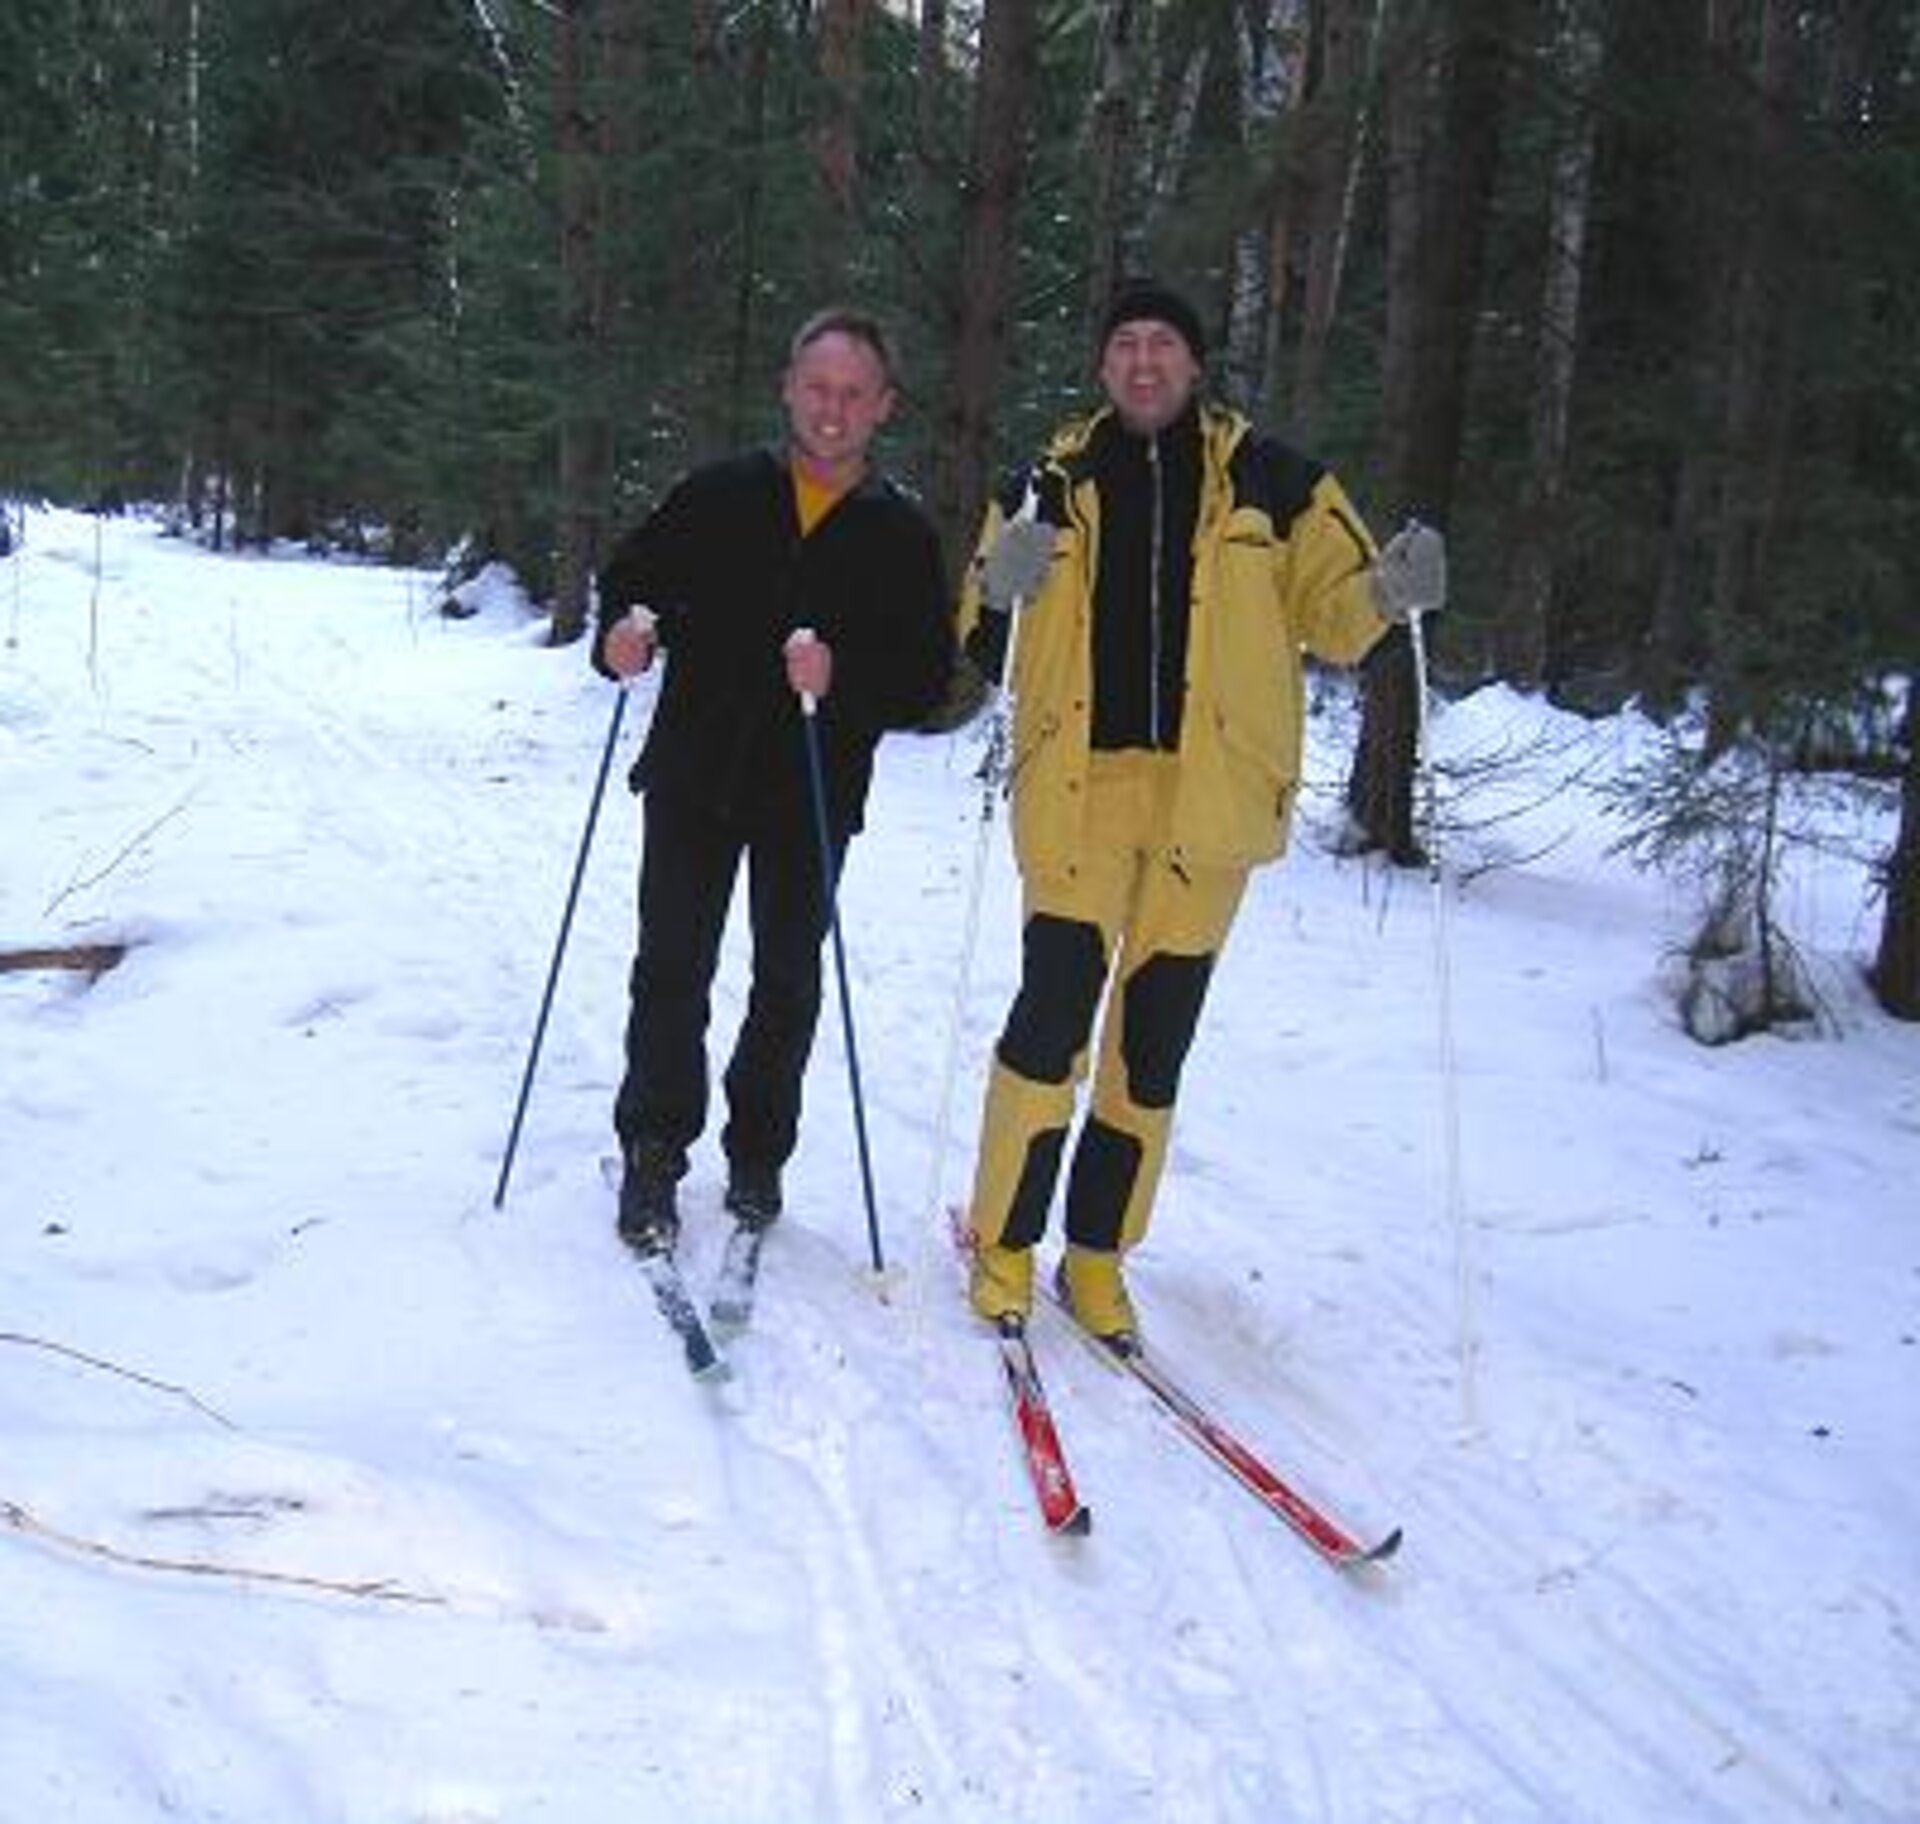 Last time cross country skiing, with Michael Fincke